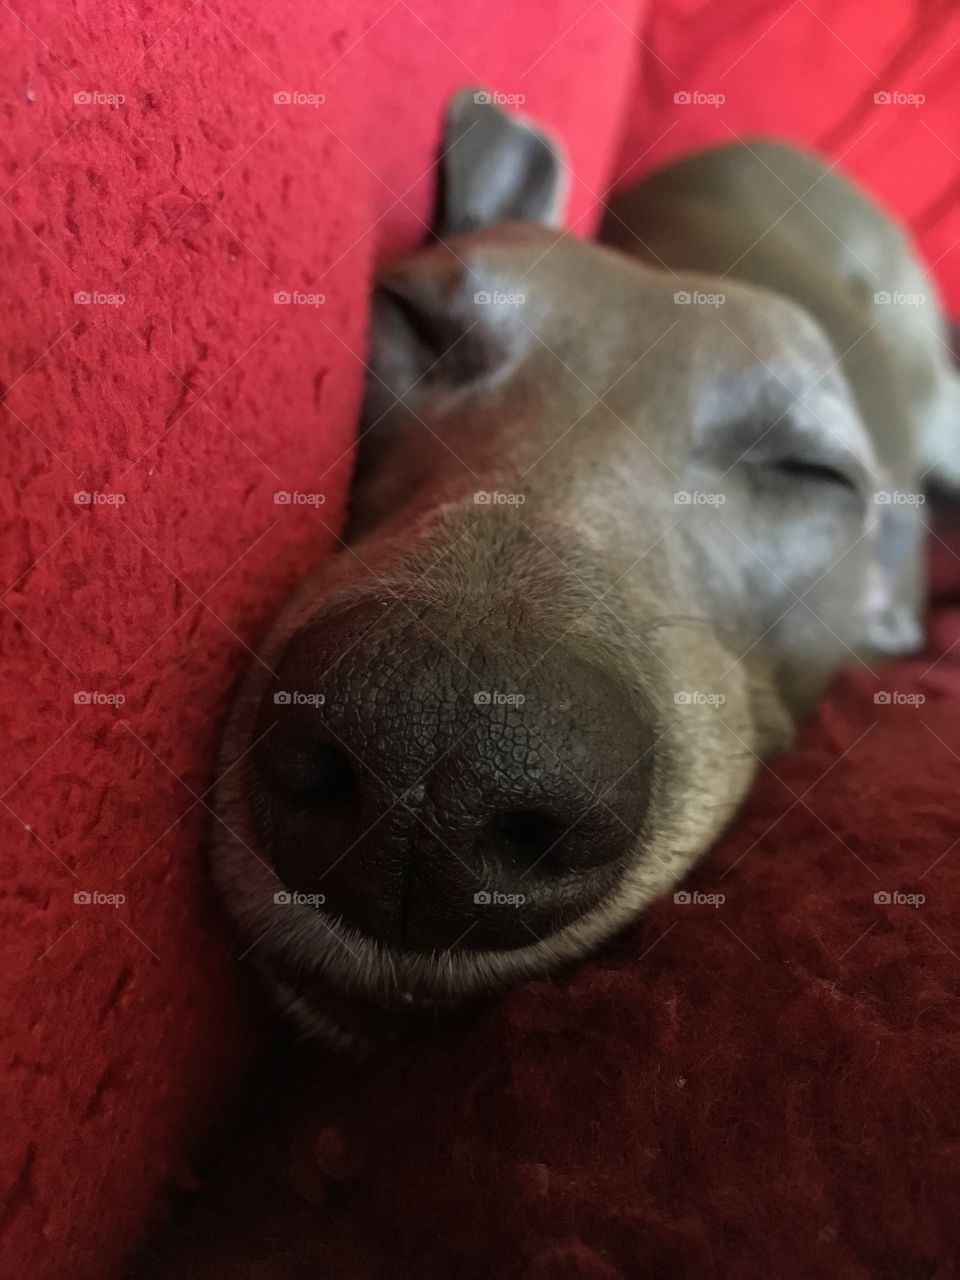 Libby the blue whippet dog asleep, with nose in close up view on red blanket 